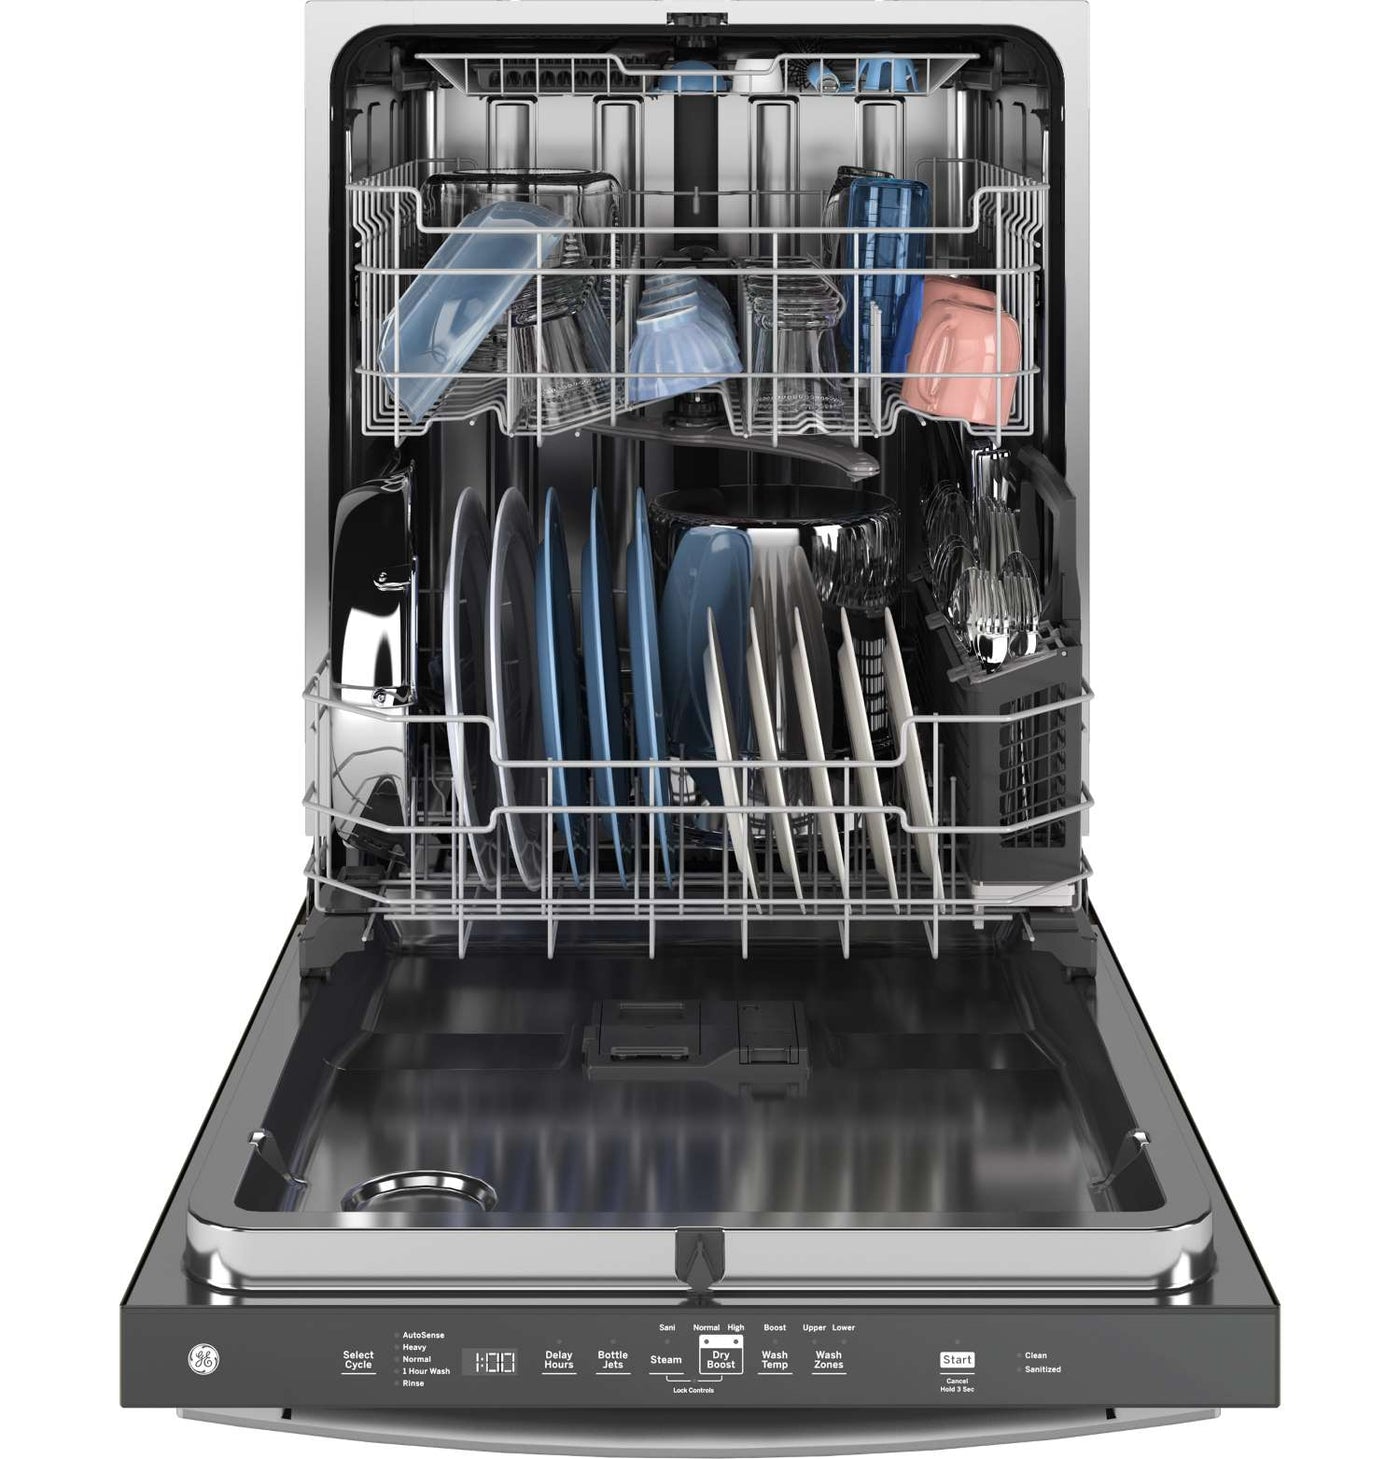 GE 24" Fingerprint Resistant Stainless Steel Top Control Dishwasher with Stainless Steel Interior and Third Rack - GDT670SYVFS